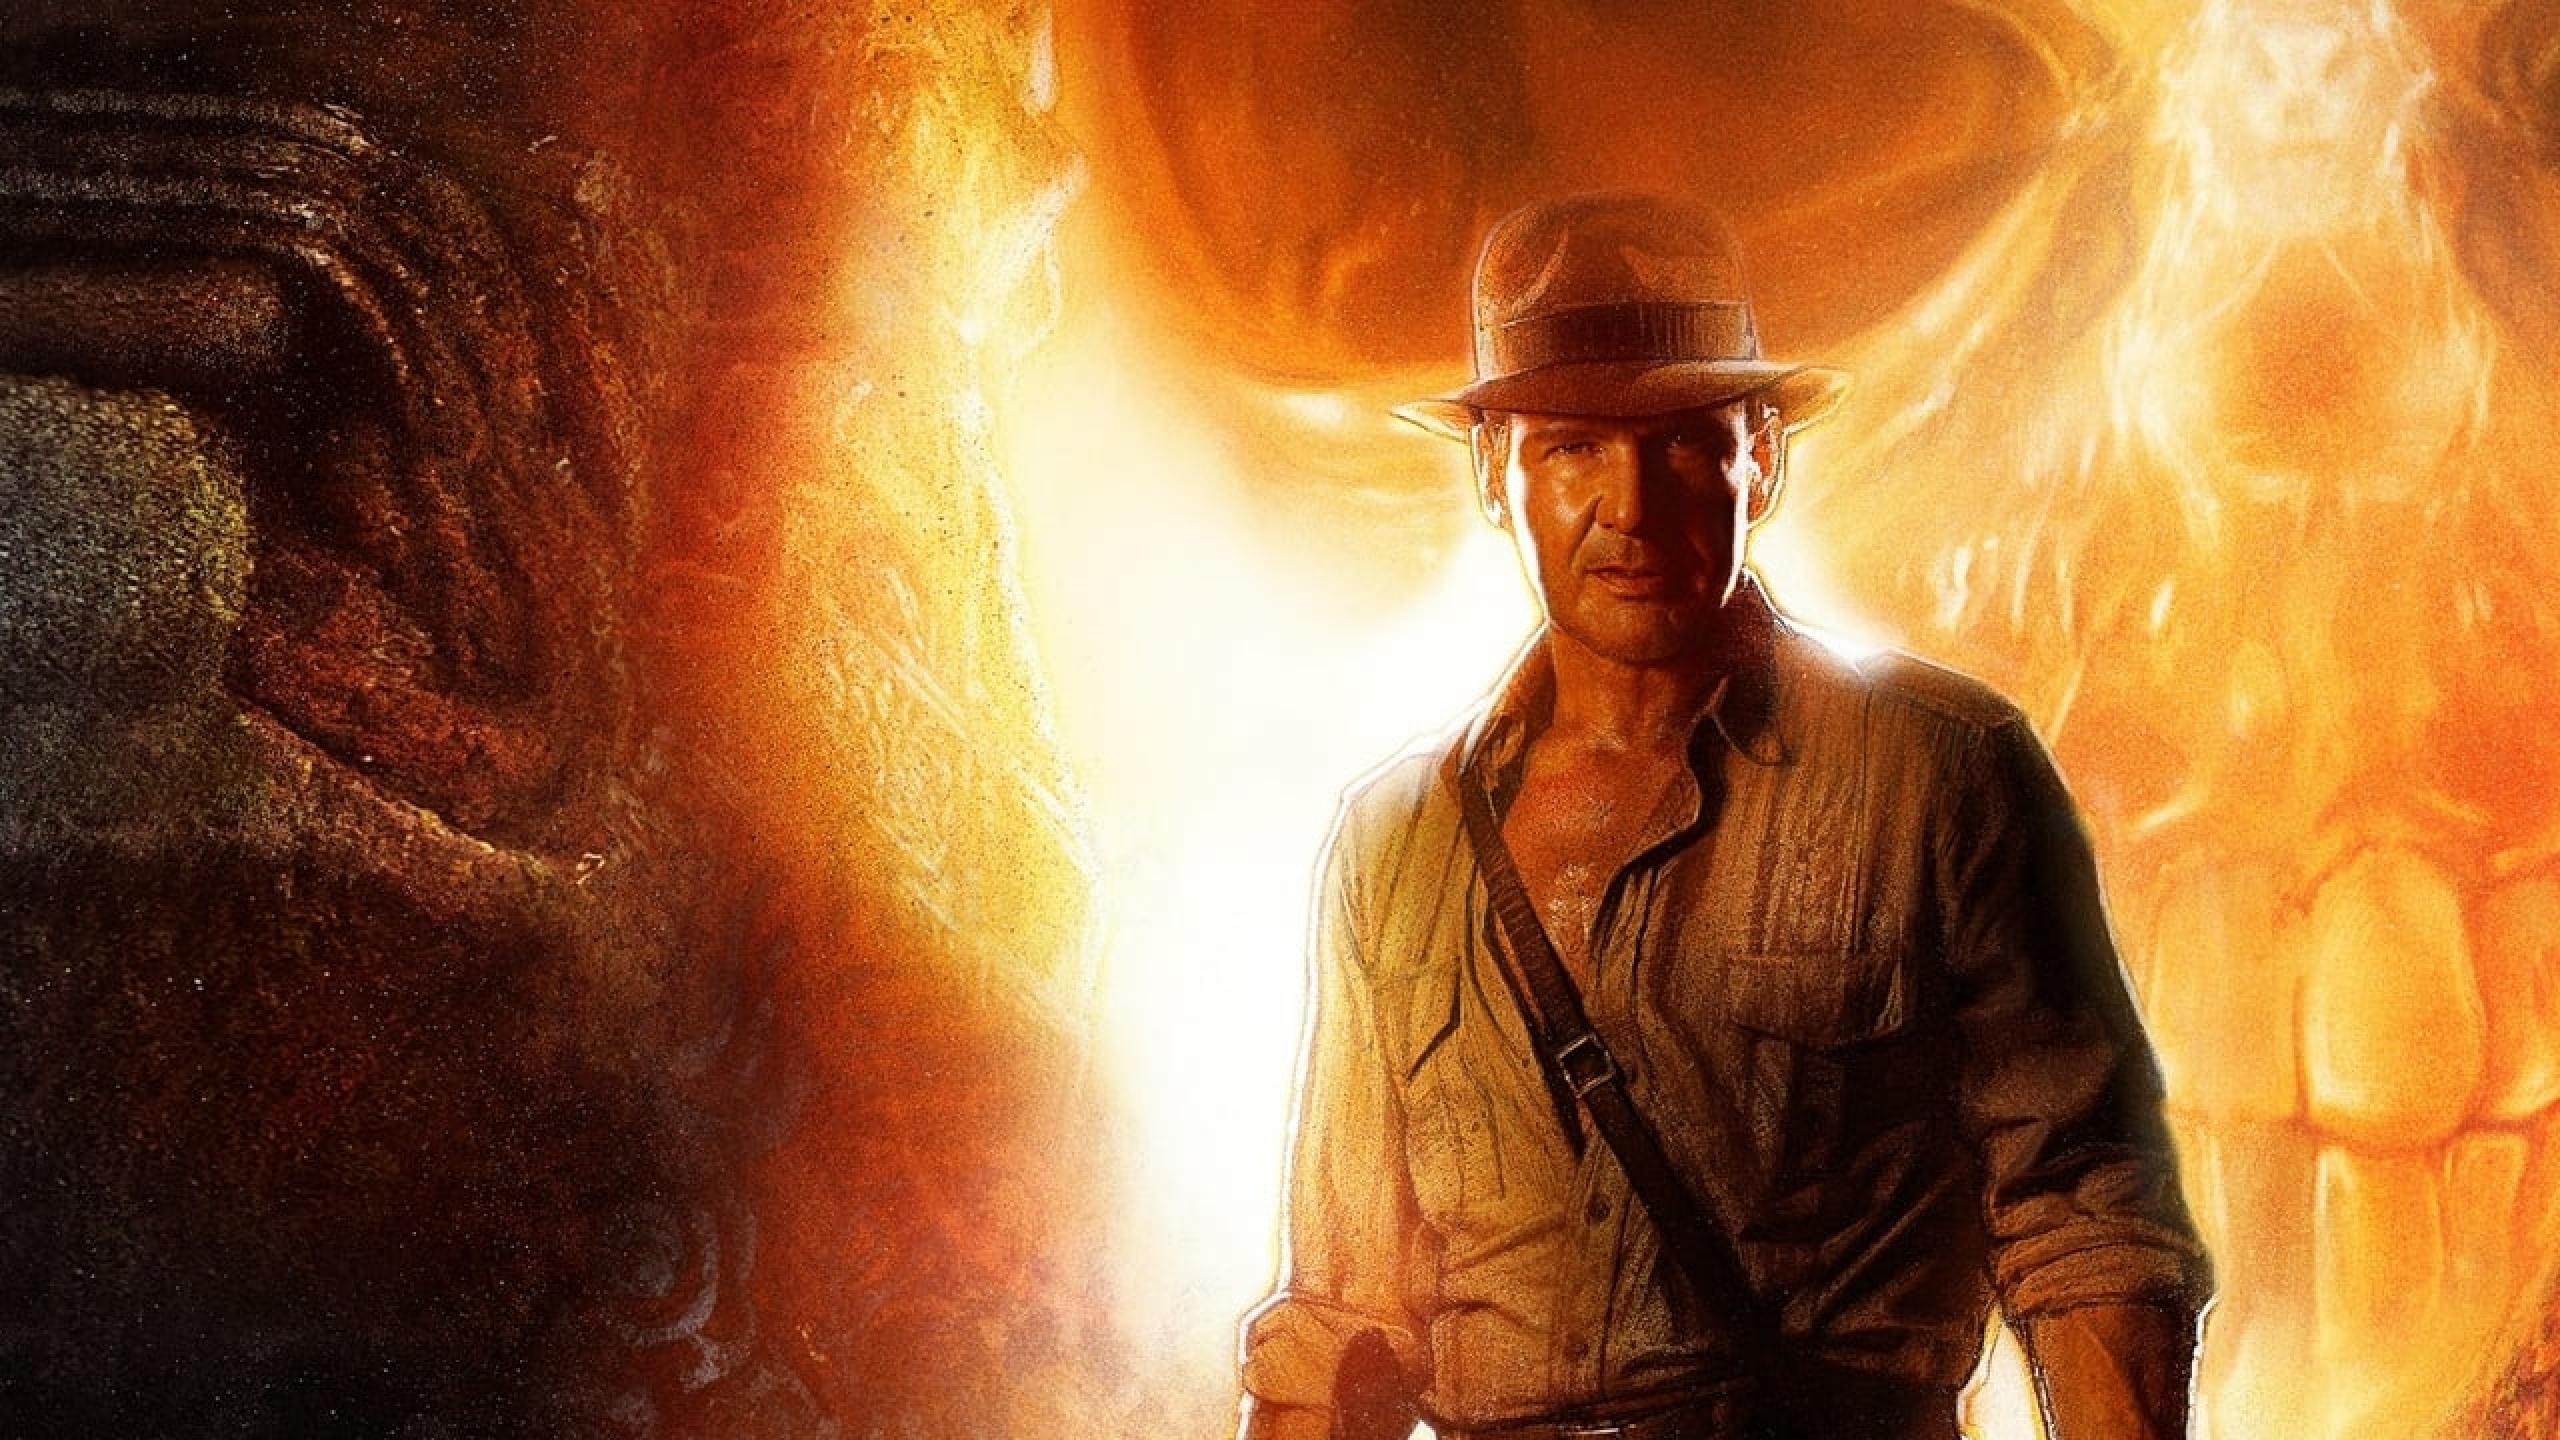 2560x1440 Indiana Jones And The Kingdom Of The Crystal Skull 1440p Resolution Wallpaper Hd